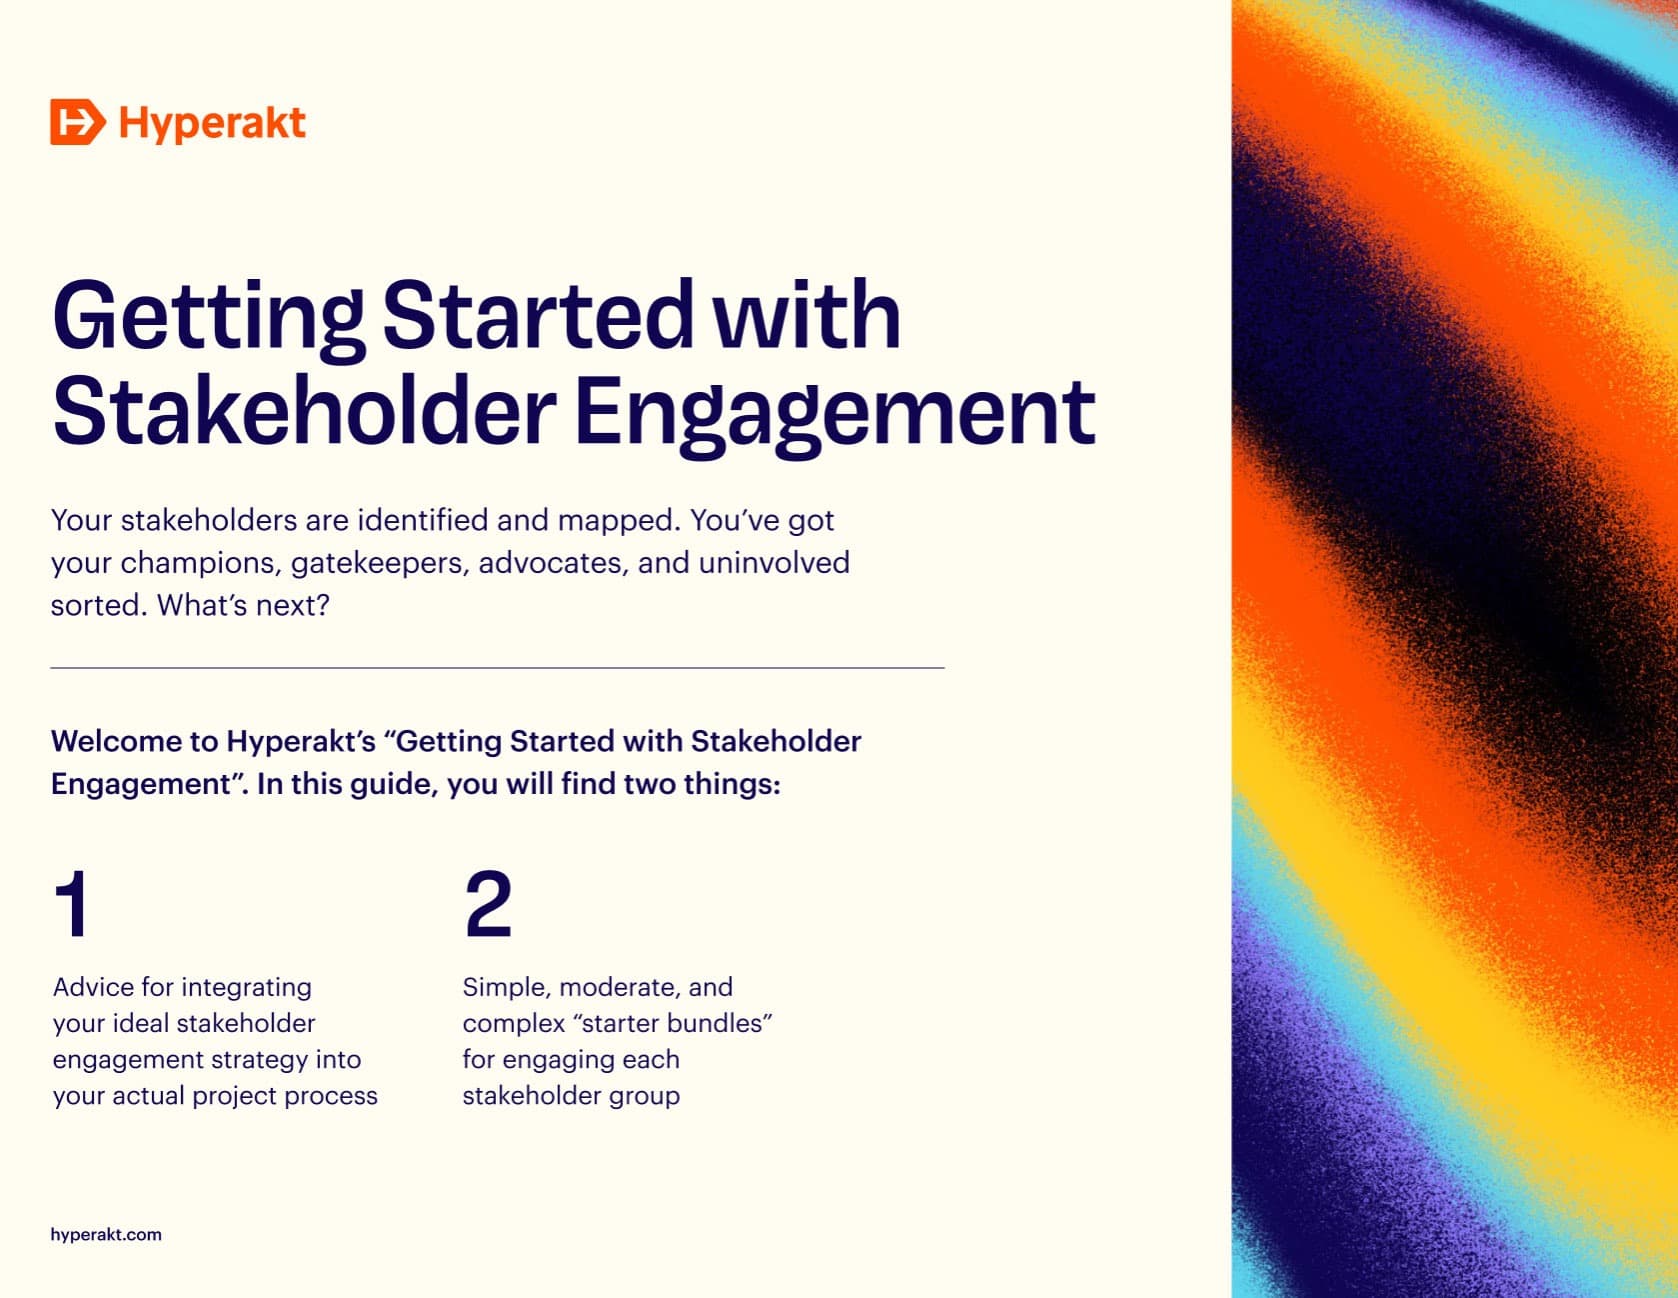 An informational graphic by Hyperakt titled "Getting Started with Stakeholder Engagement." It includes an introduction to stakeholder identification, mapping, and engagement. The guide offers advice for integrating strategies into a project and creating "starter bundles.